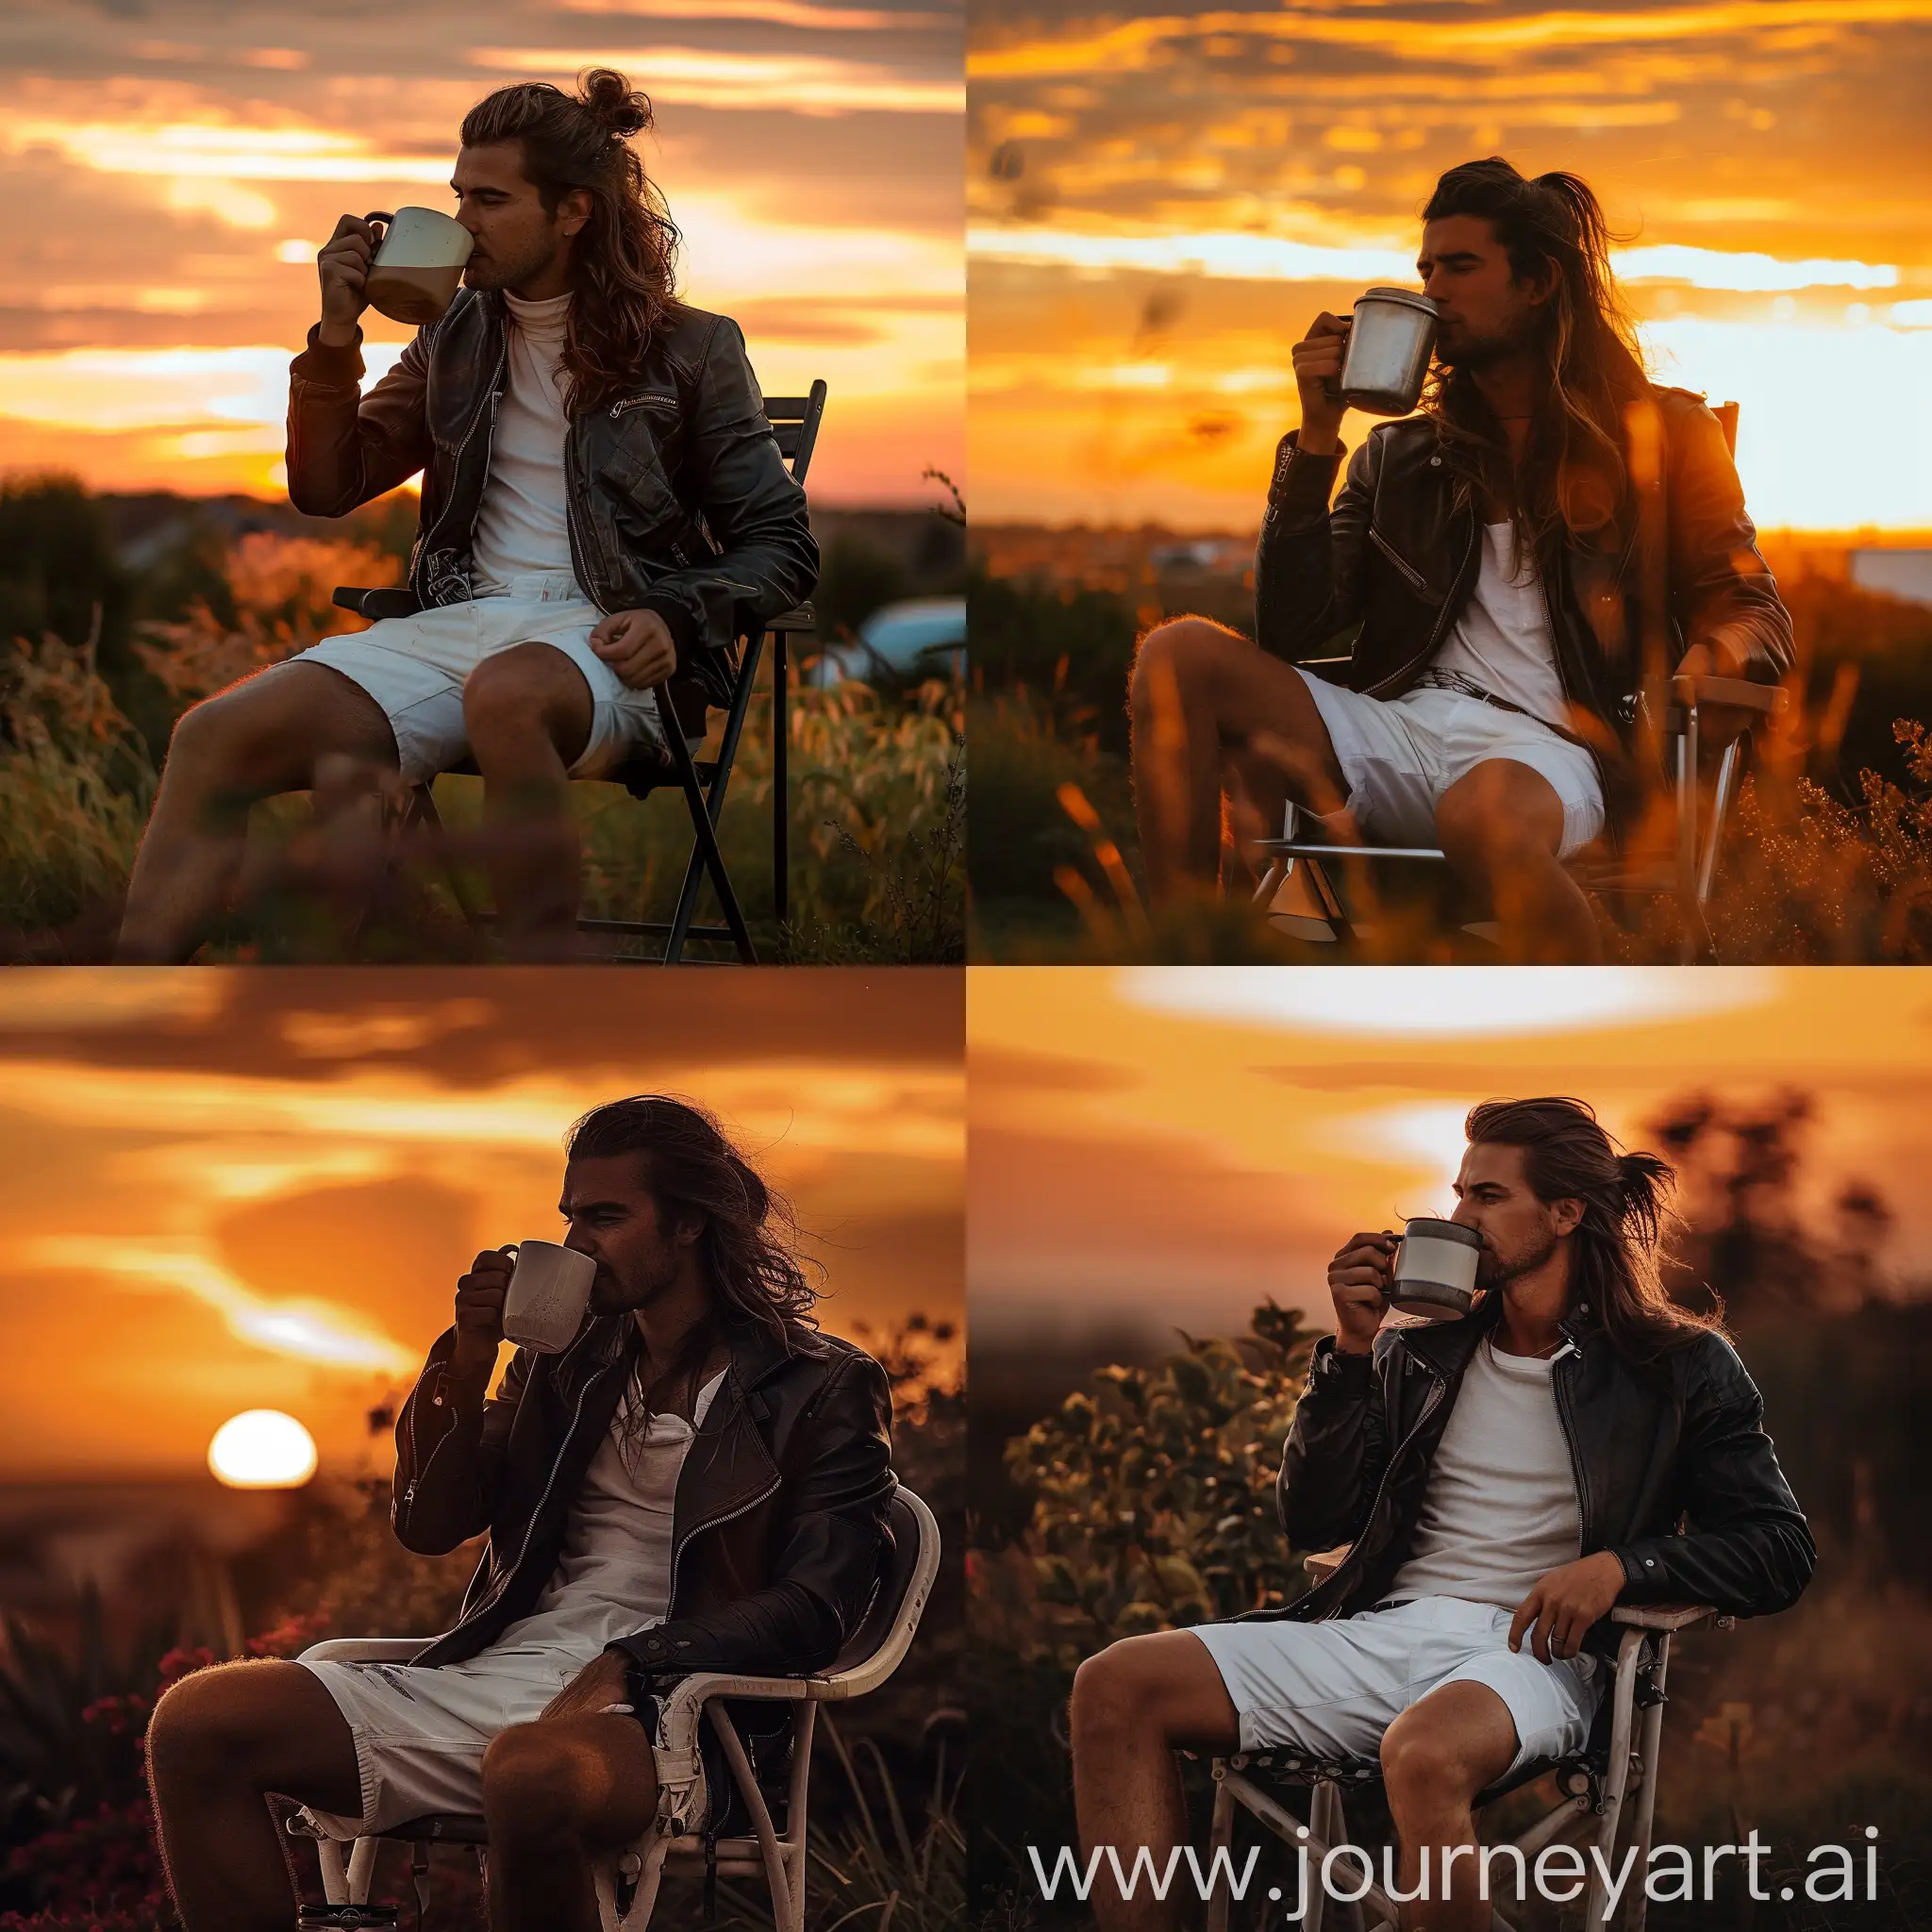 Guy tied long hair sitting in a chair wearing leather jacket and white shorts sipping coffee with big mug in a sunset